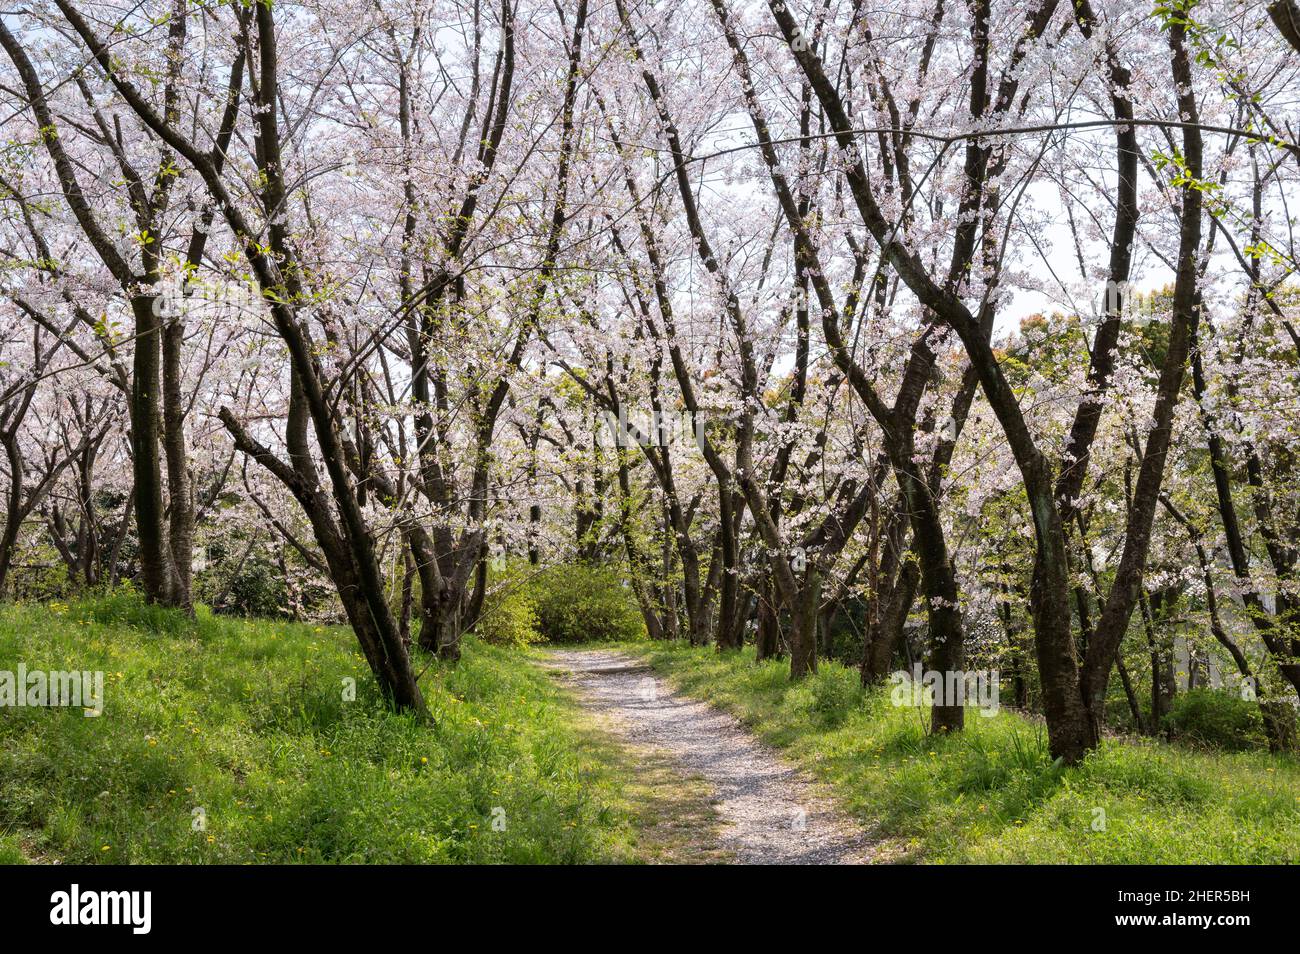 Walking path covered with fallen sakura petals in between blooming cherry blossom trees. Springtime in a park. Stock Photo